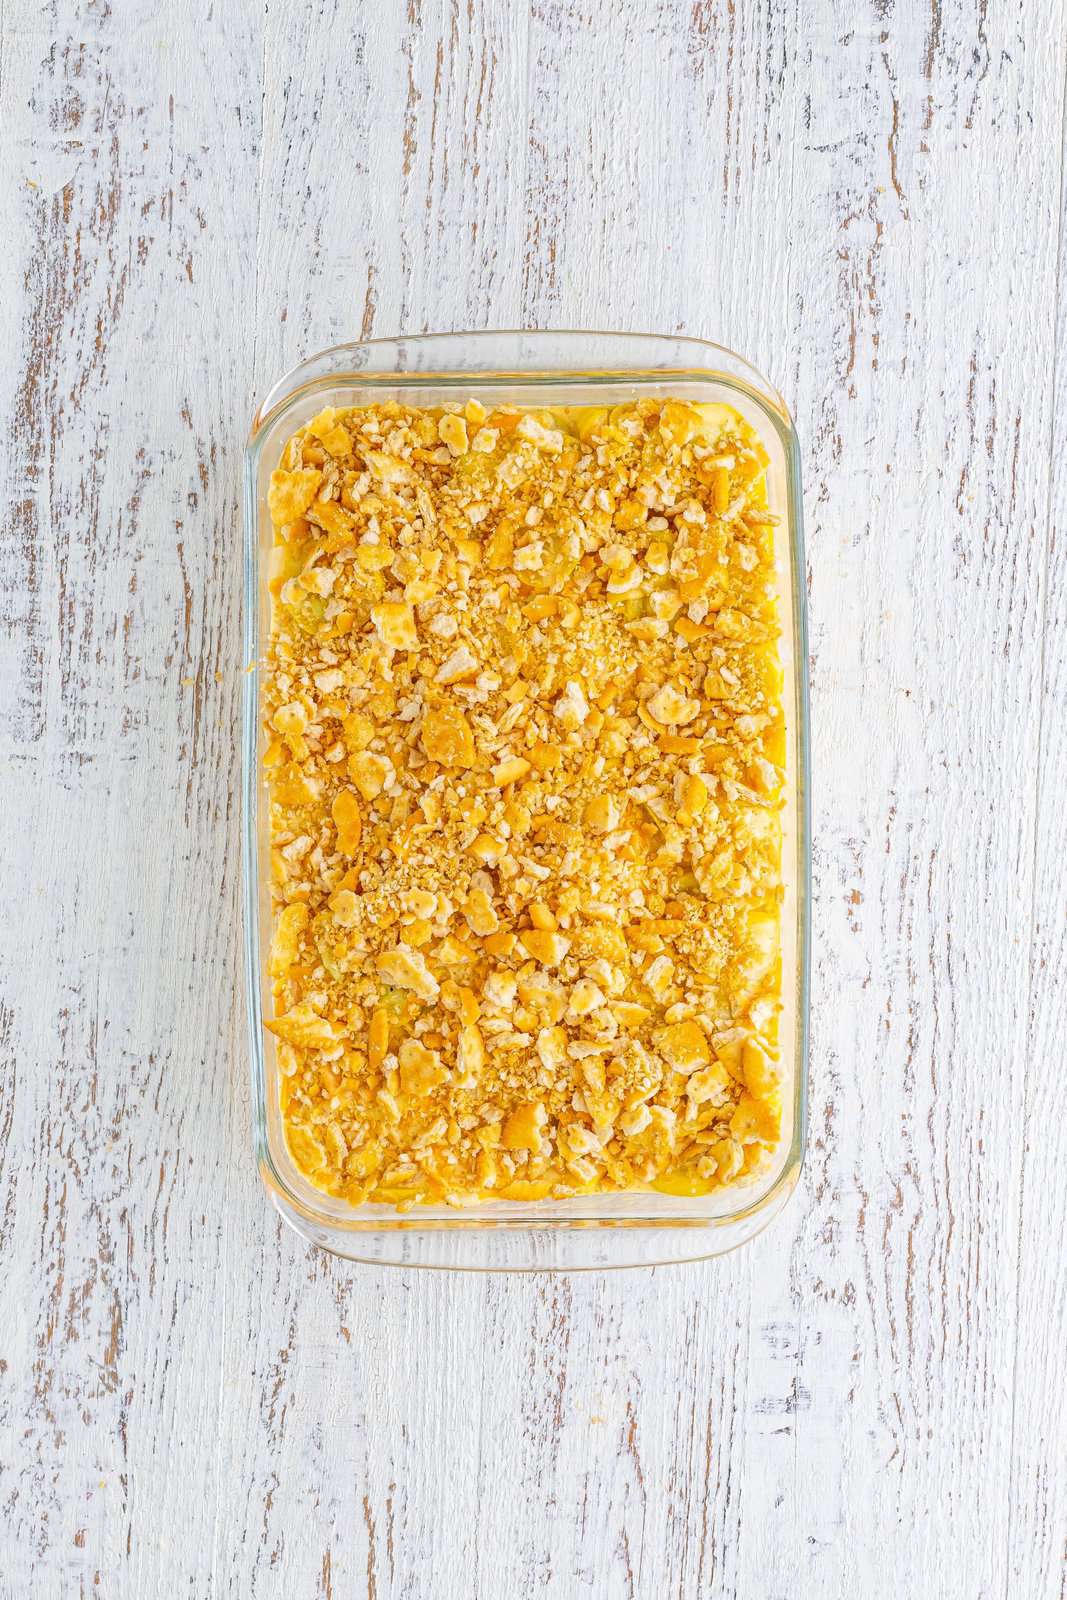 Squash casserole with crushed cracker topping.